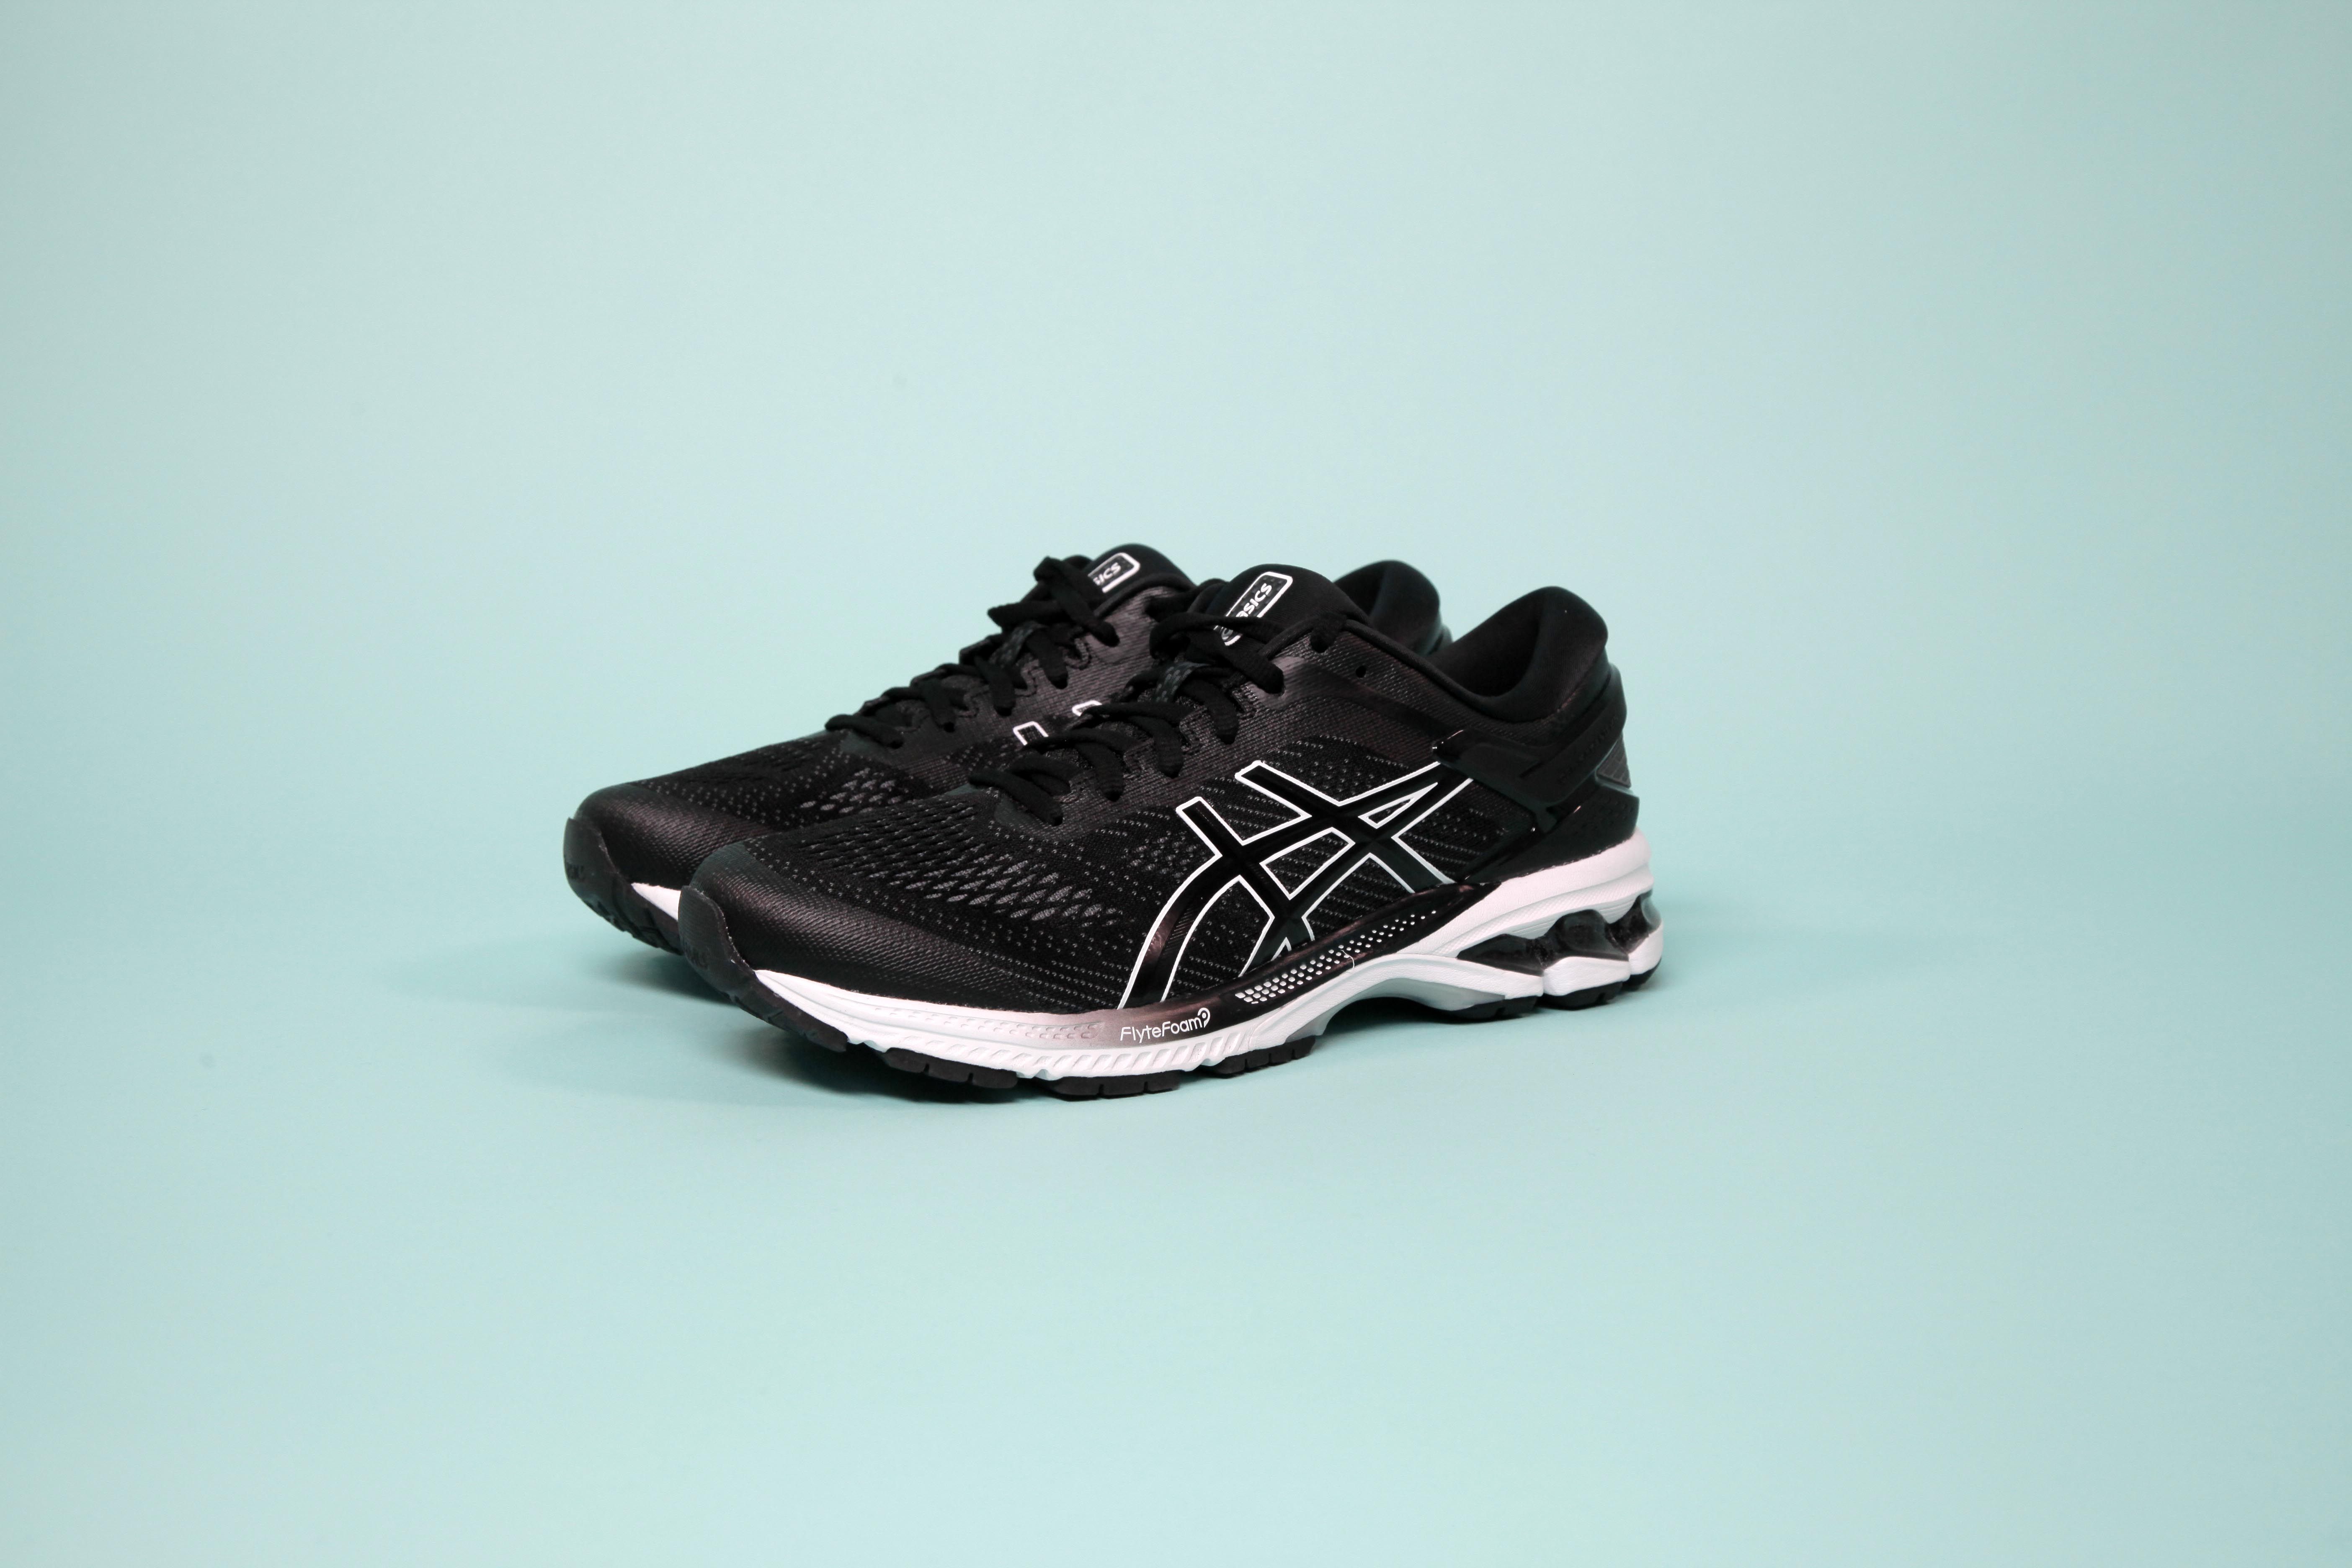 Asics Gel Kayano 26 is a reliable shoe 